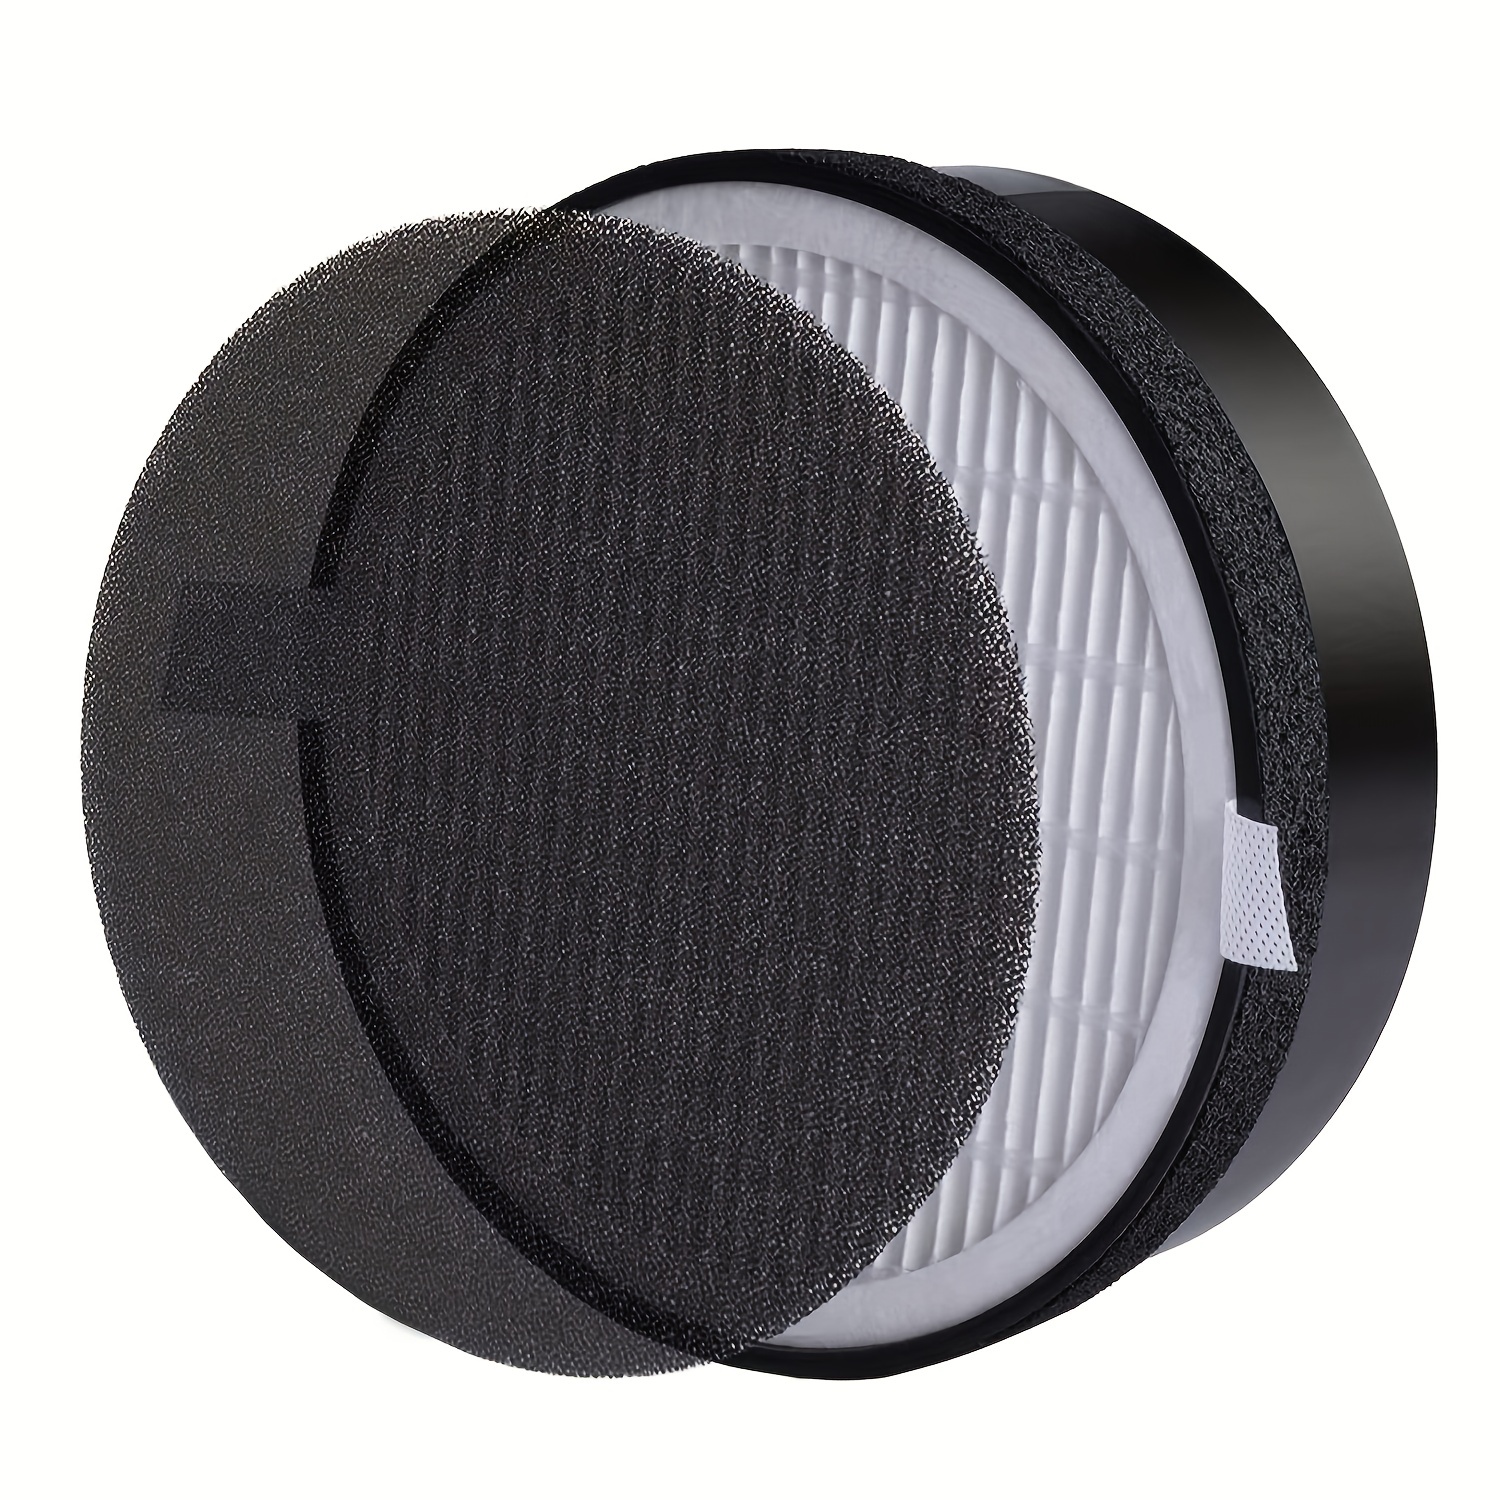 Replacement Air Purifier filter for Levoit LV-PUR131 (1-Pack)